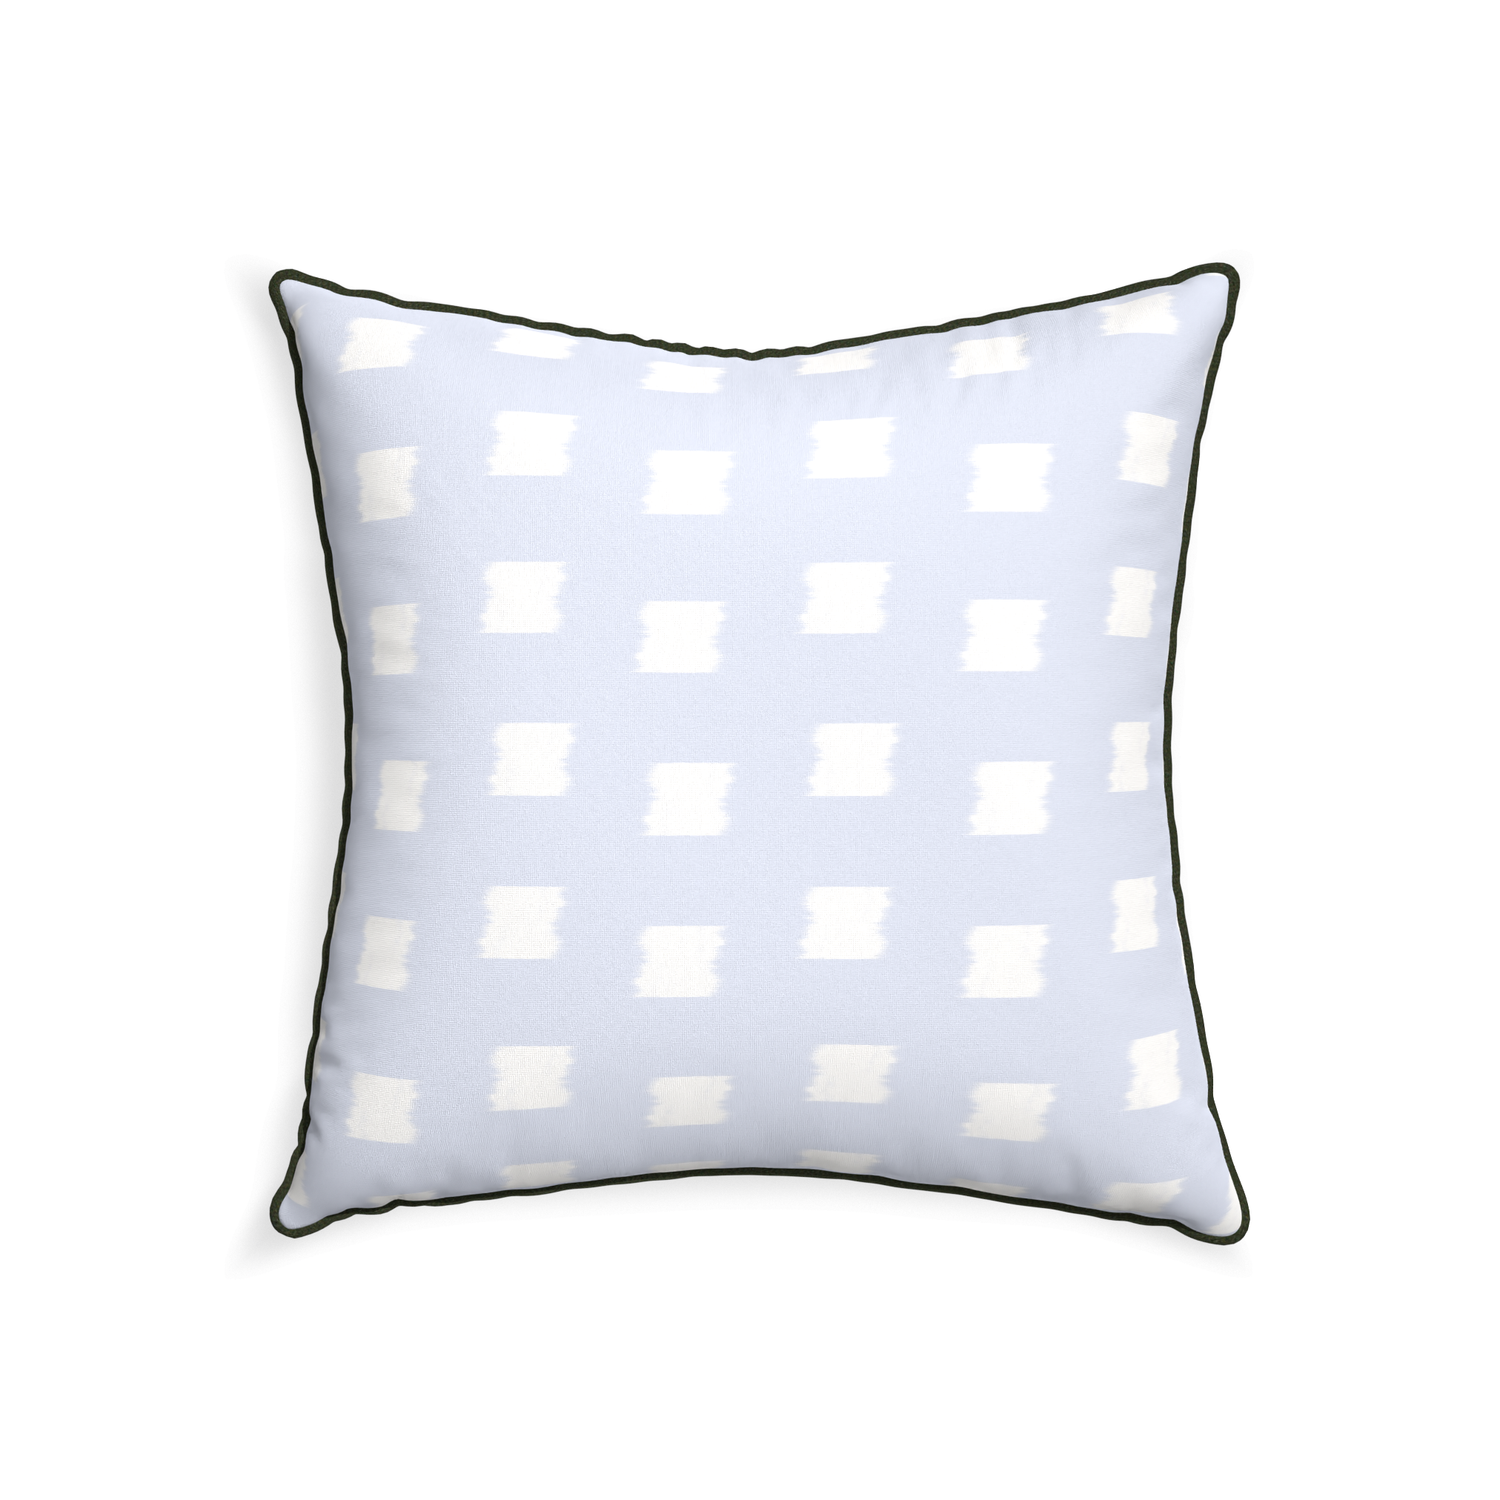 22-square denton custom sky blue patternpillow with f piping on white background